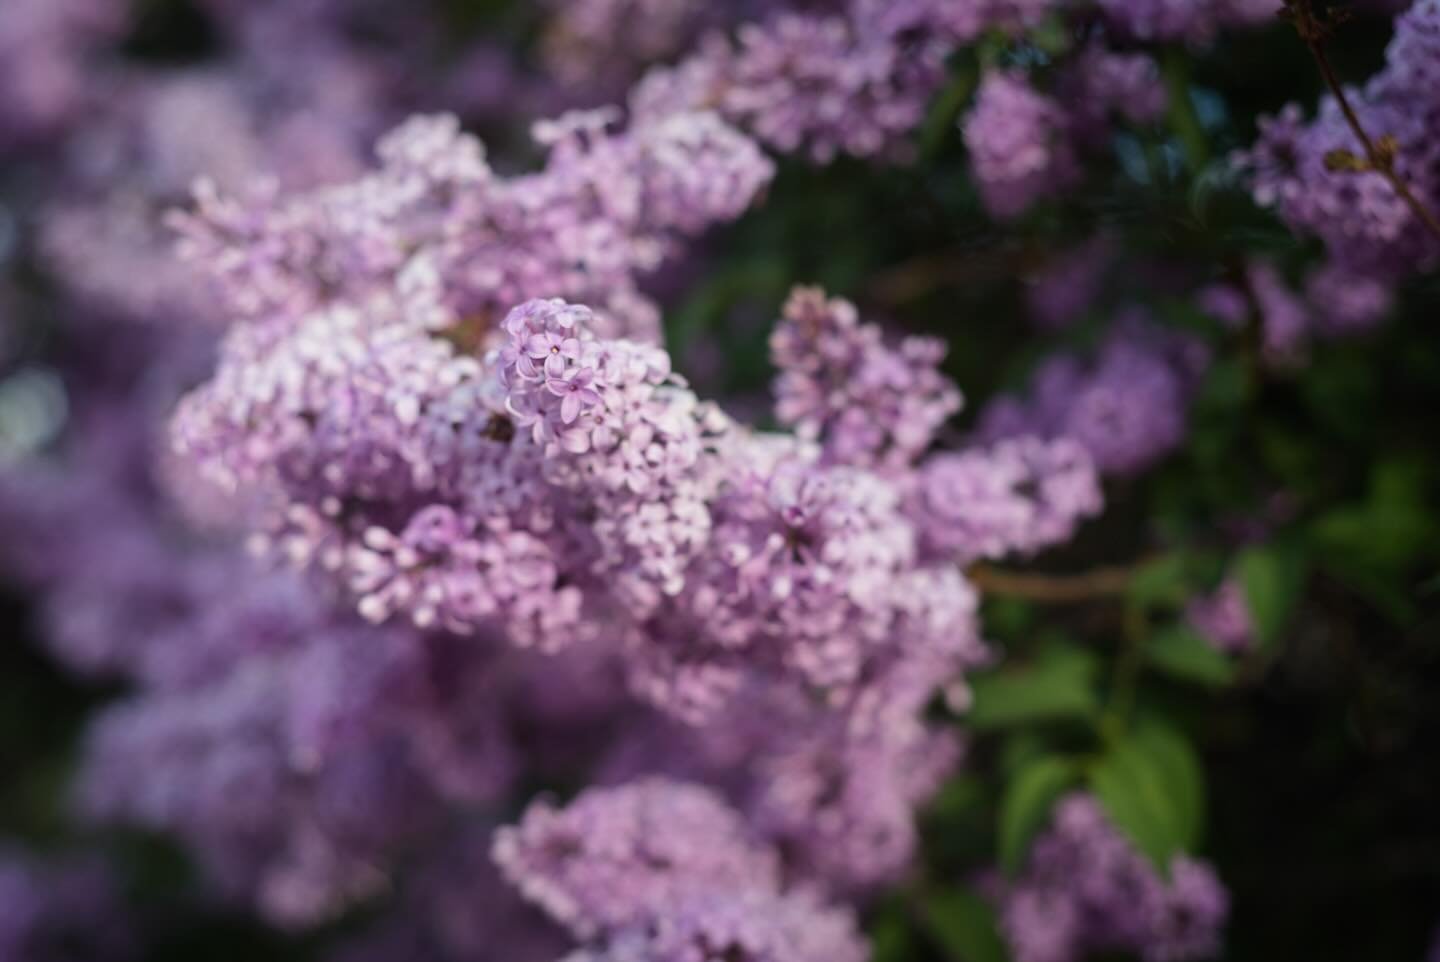 I&rsquo;m still gonna post stills here damnit you IG 😂😂

Spring pictures from an evening stroll in my latest blog post. Link in bio - Stop and smell the lilacs 🪻